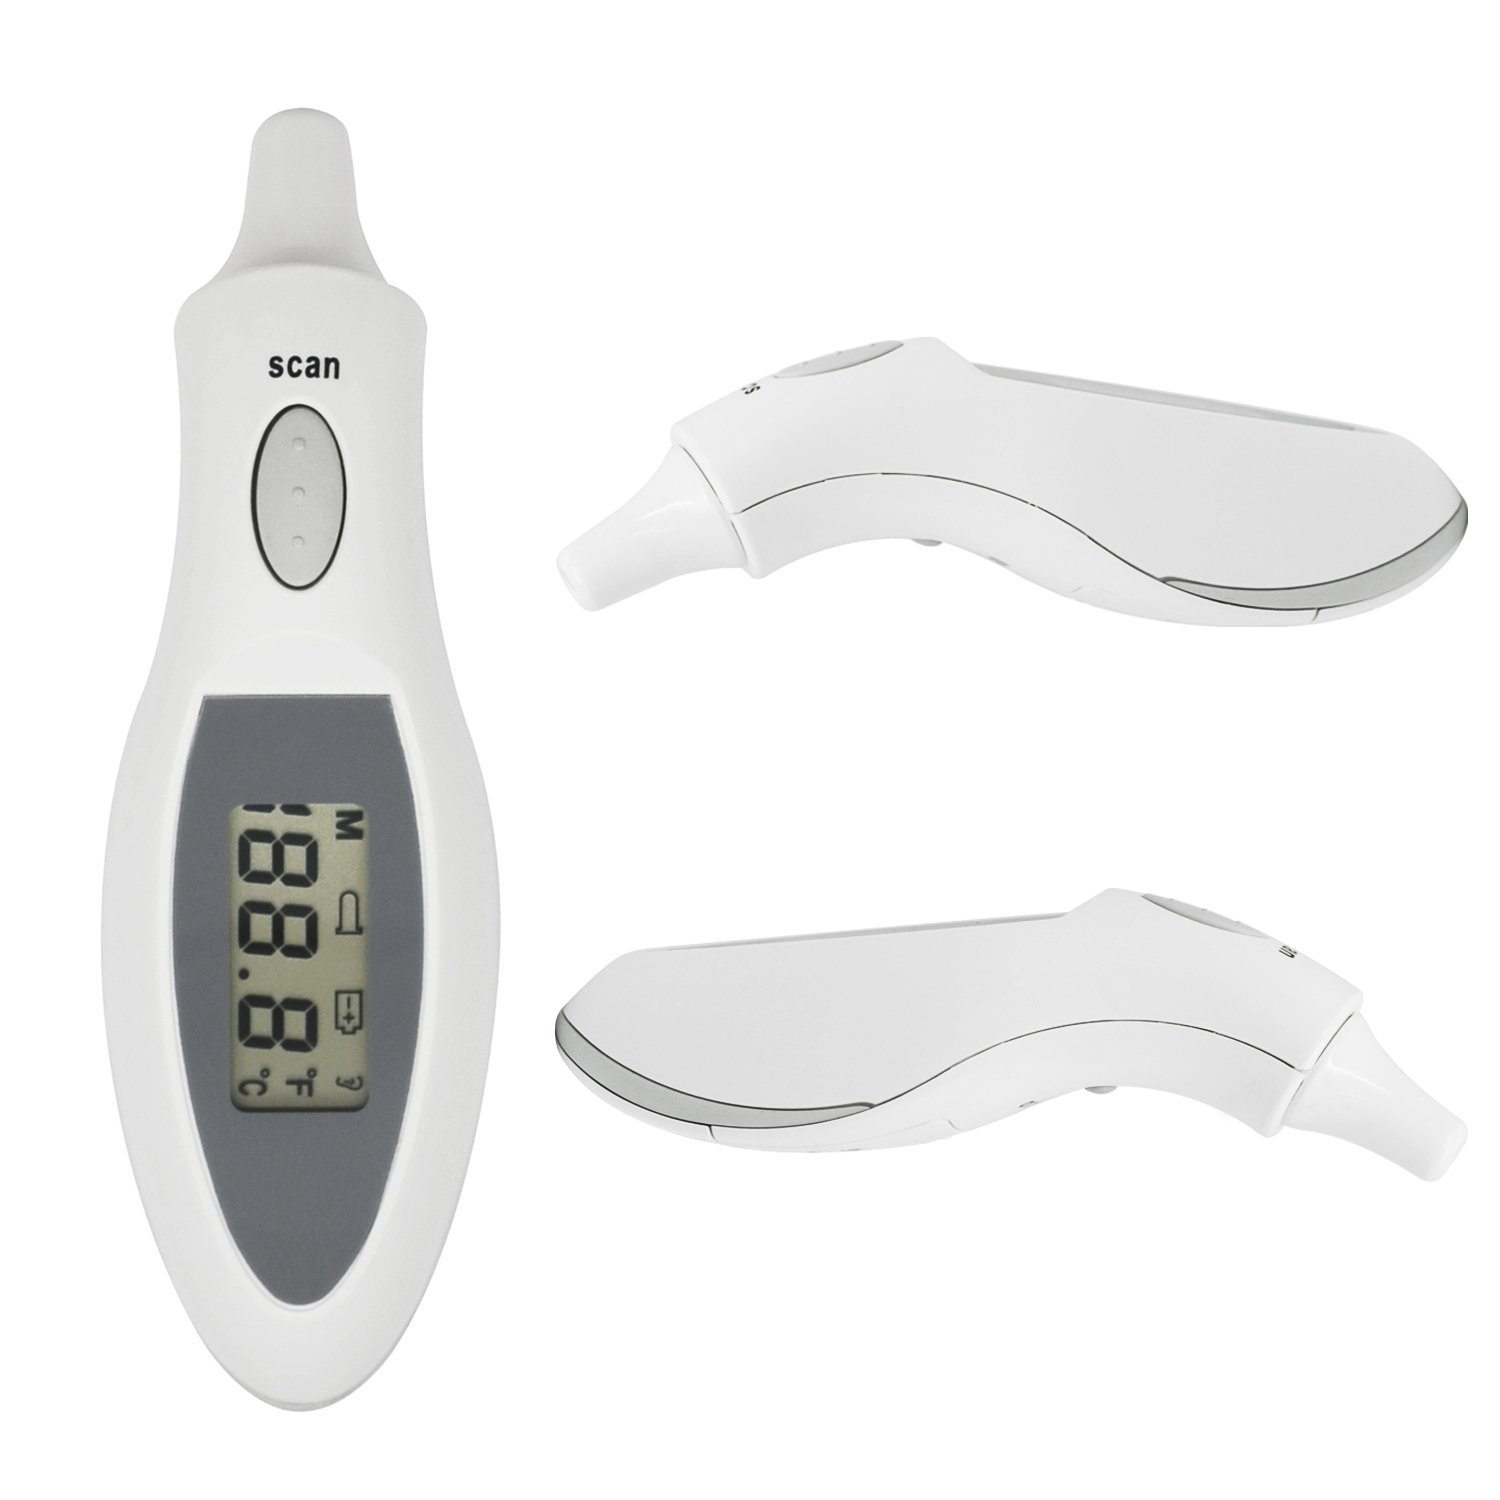 Incutex Infrarot Ohrthermometer